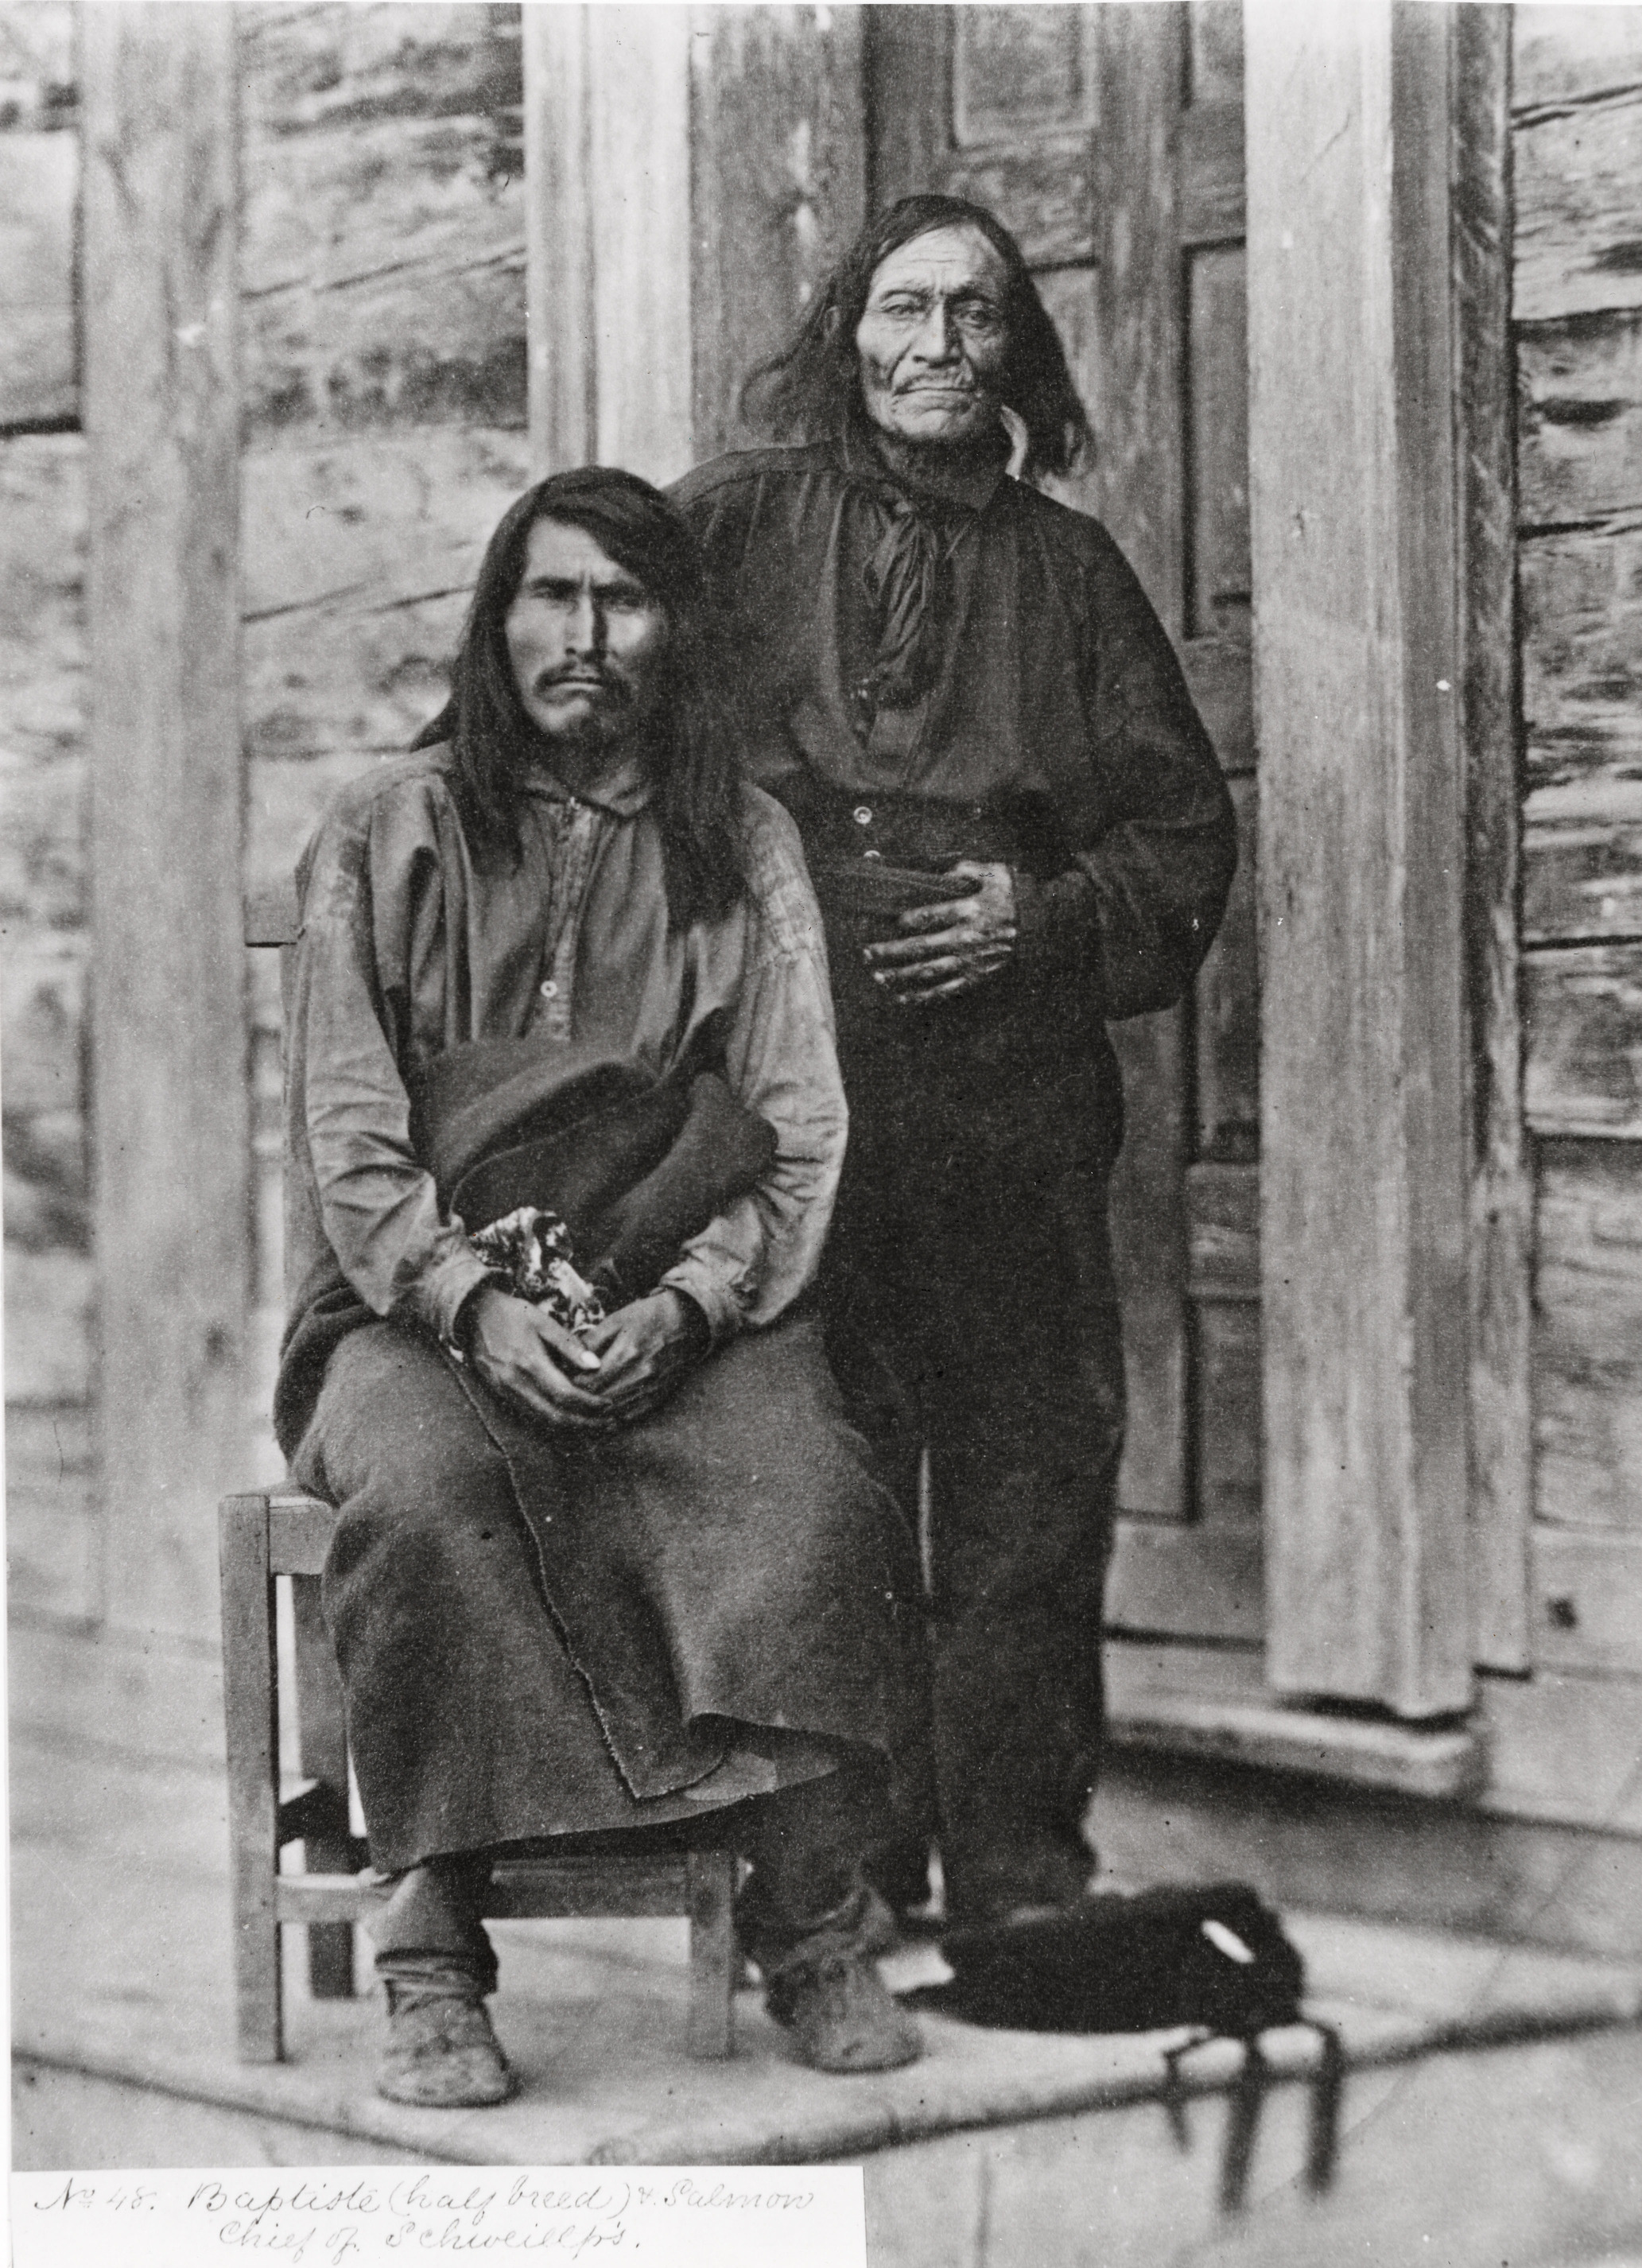 Black and white photograph of two people, one sitting and one standing